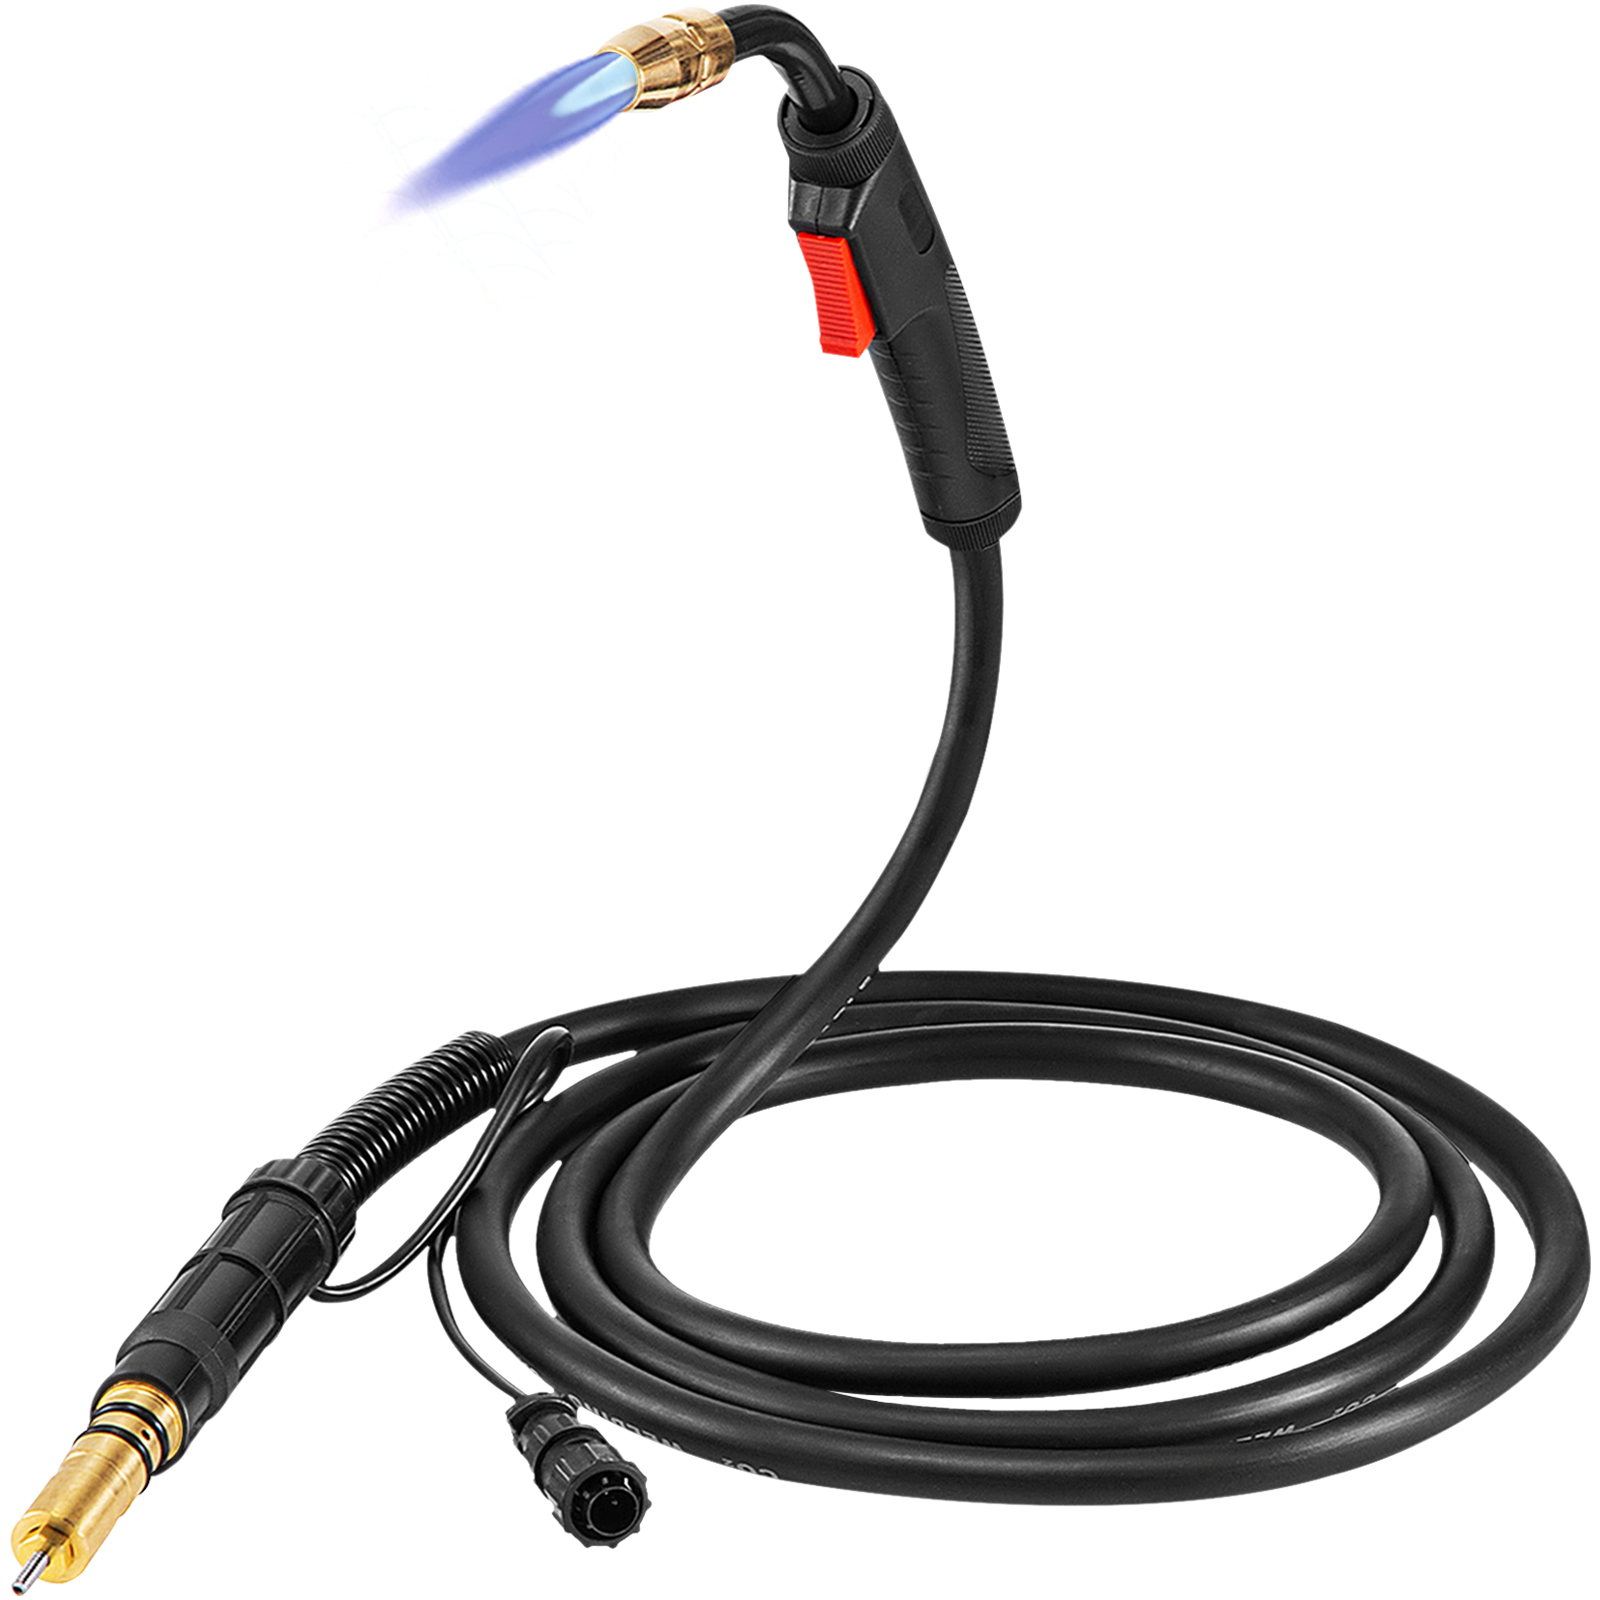 Miller Mig Welding Torch Stinger 150a 15-ft Replacement M-150 M-15 249040 от Vevor Many GEOs